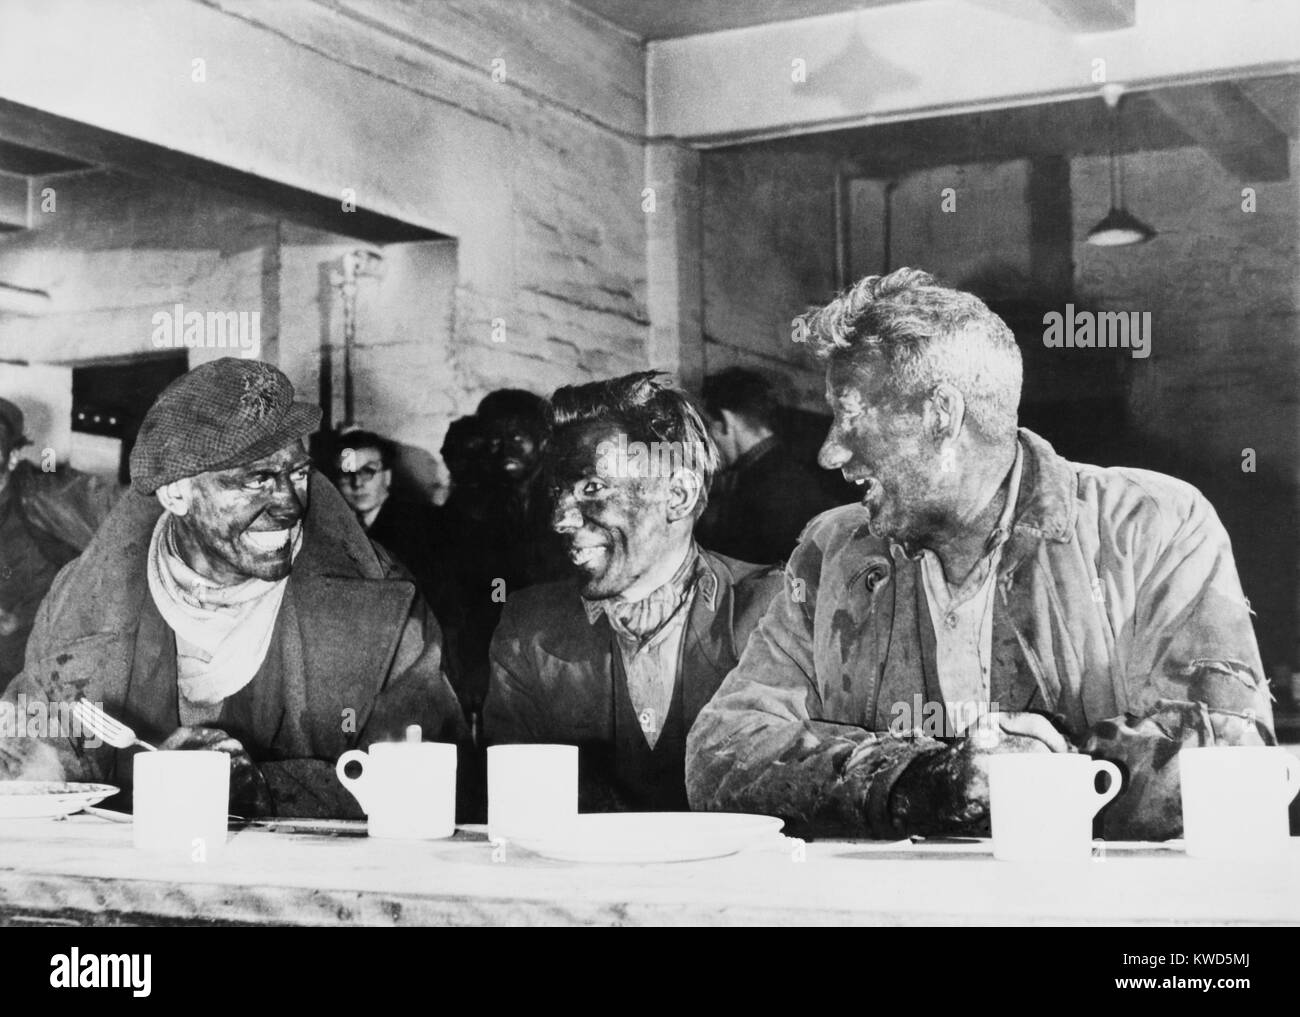 Ned Greenslade (left), champion British miner, with fellow coal miners at the canteen. He set a record by digging 120 tons of coal in a week of 6 shifts at the International Colliery, Bleangarw, Wales. Dec. 26, 1946. (BSLOC 2014 13 235) Stock Photo